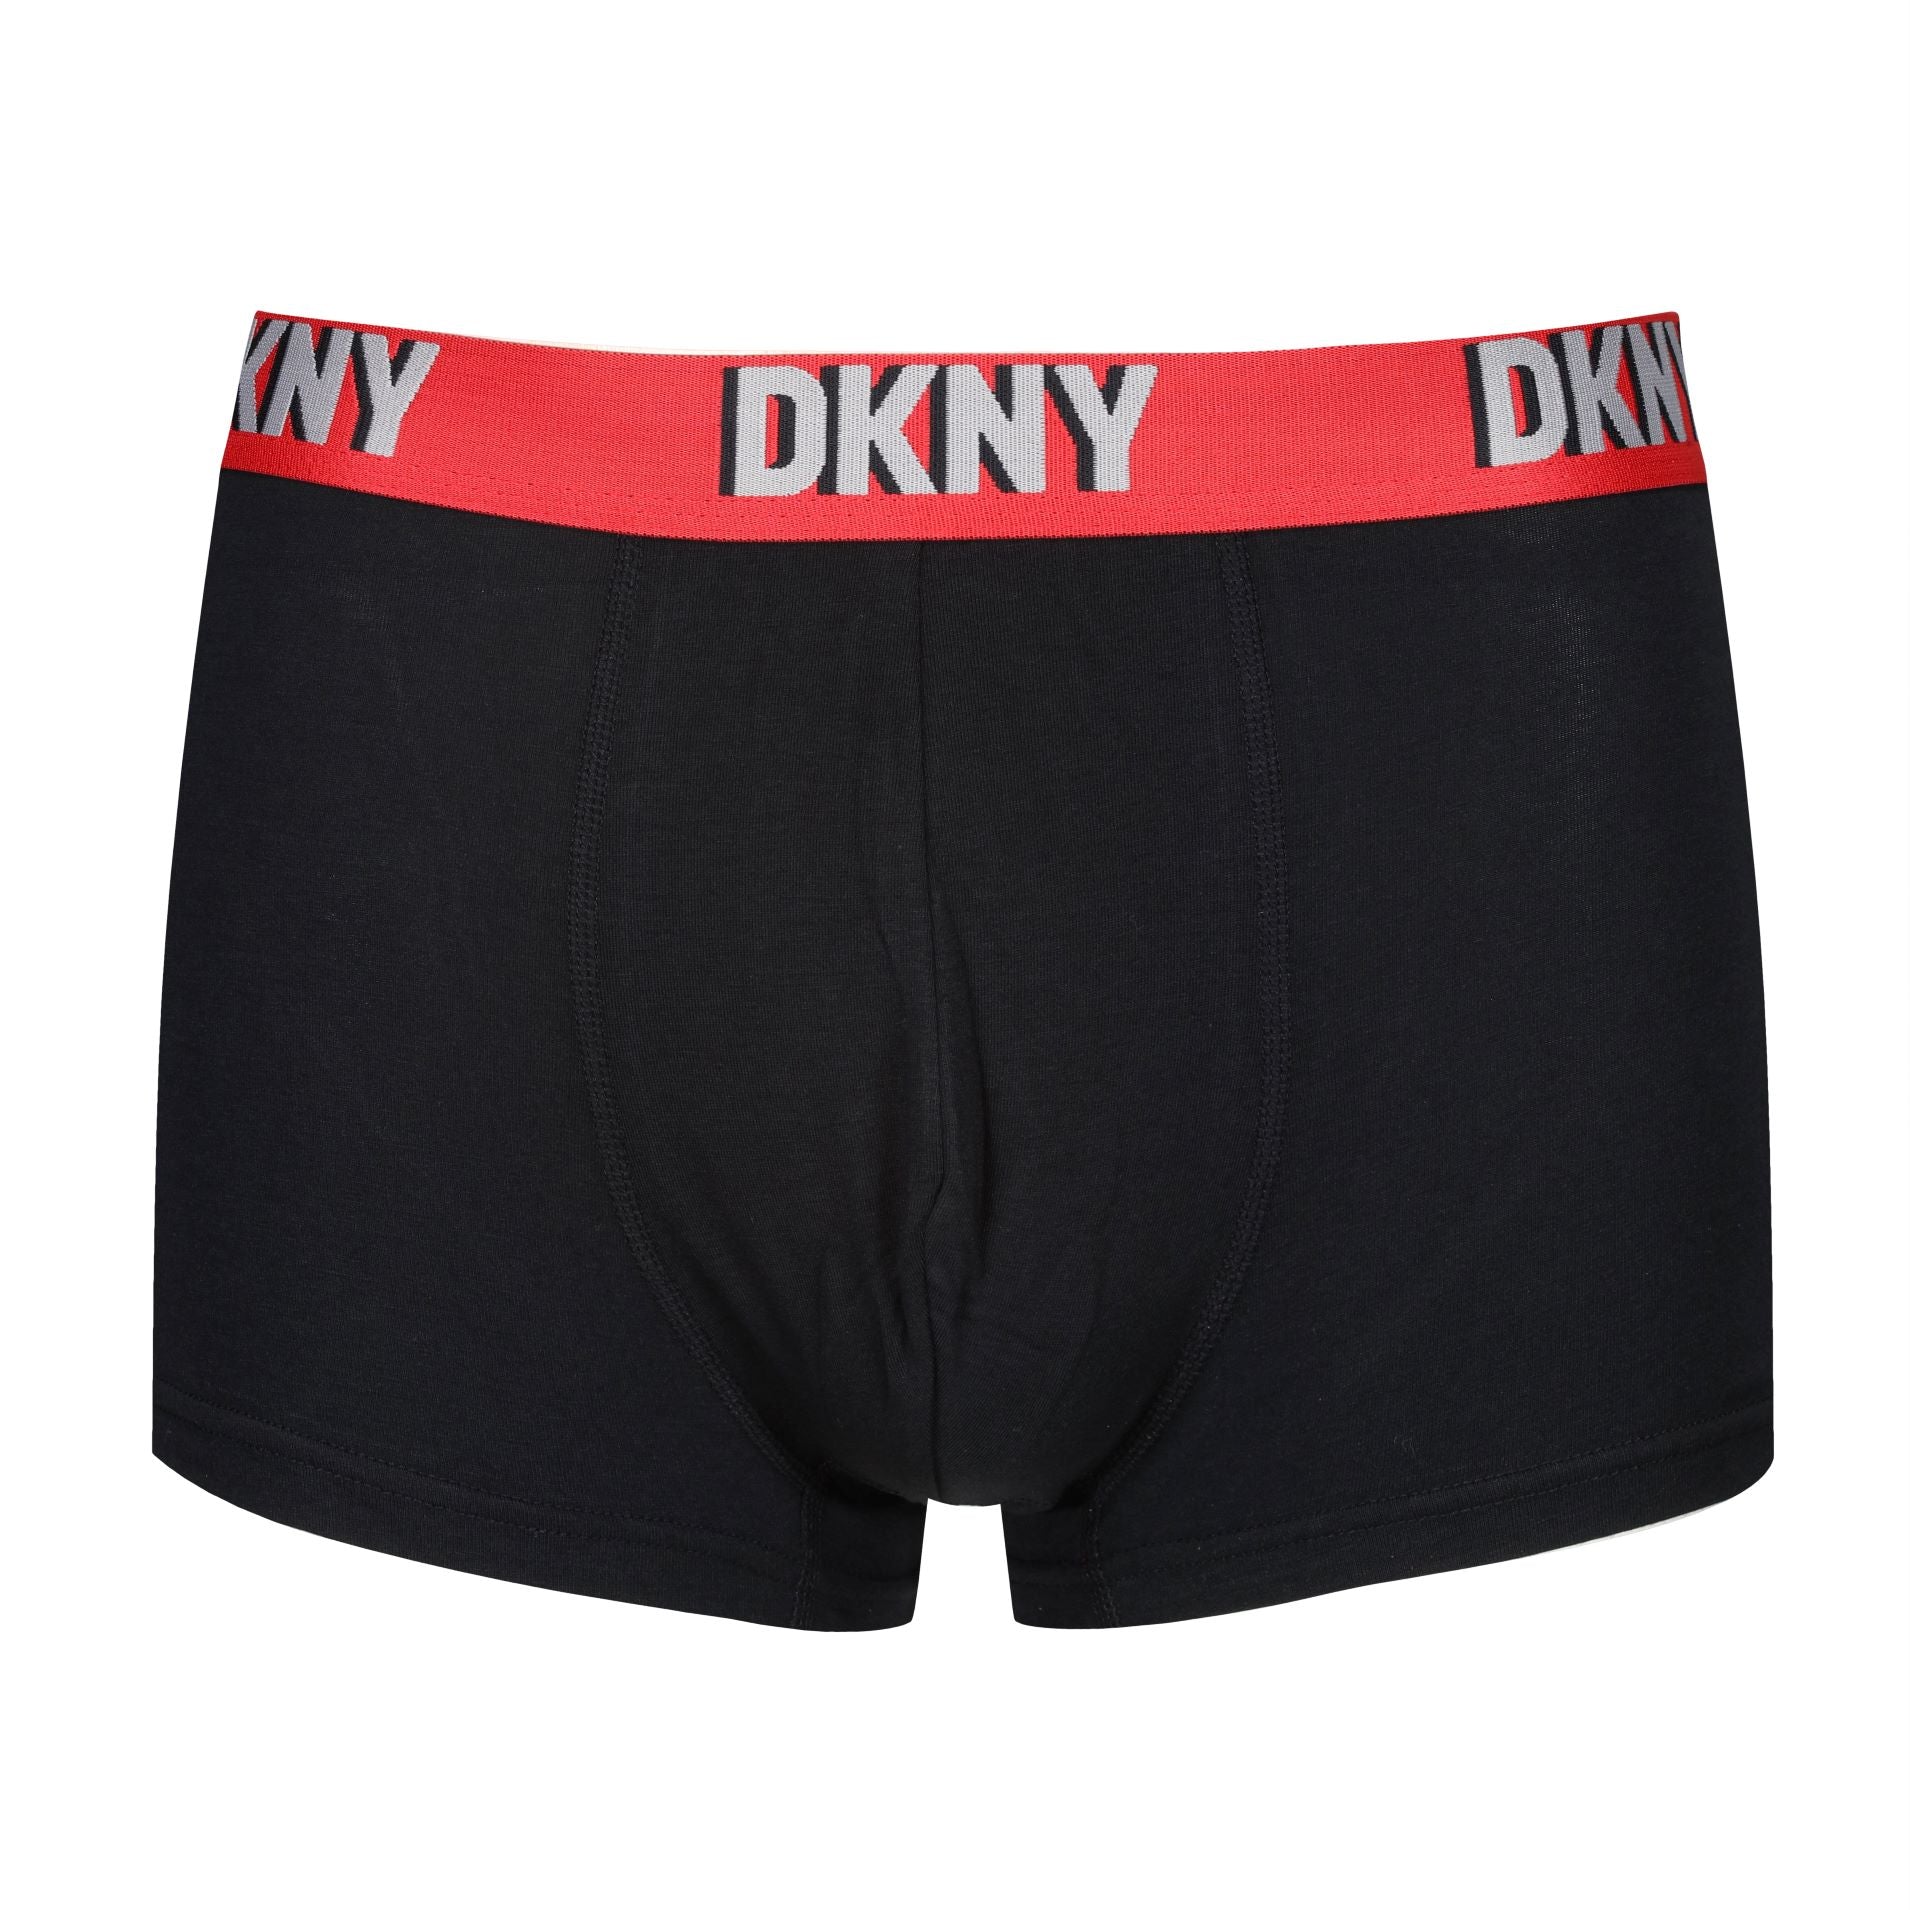 DKNY Mens Monmouth Cotton Stretch 3 pack Trunks - Black/Print/Lead